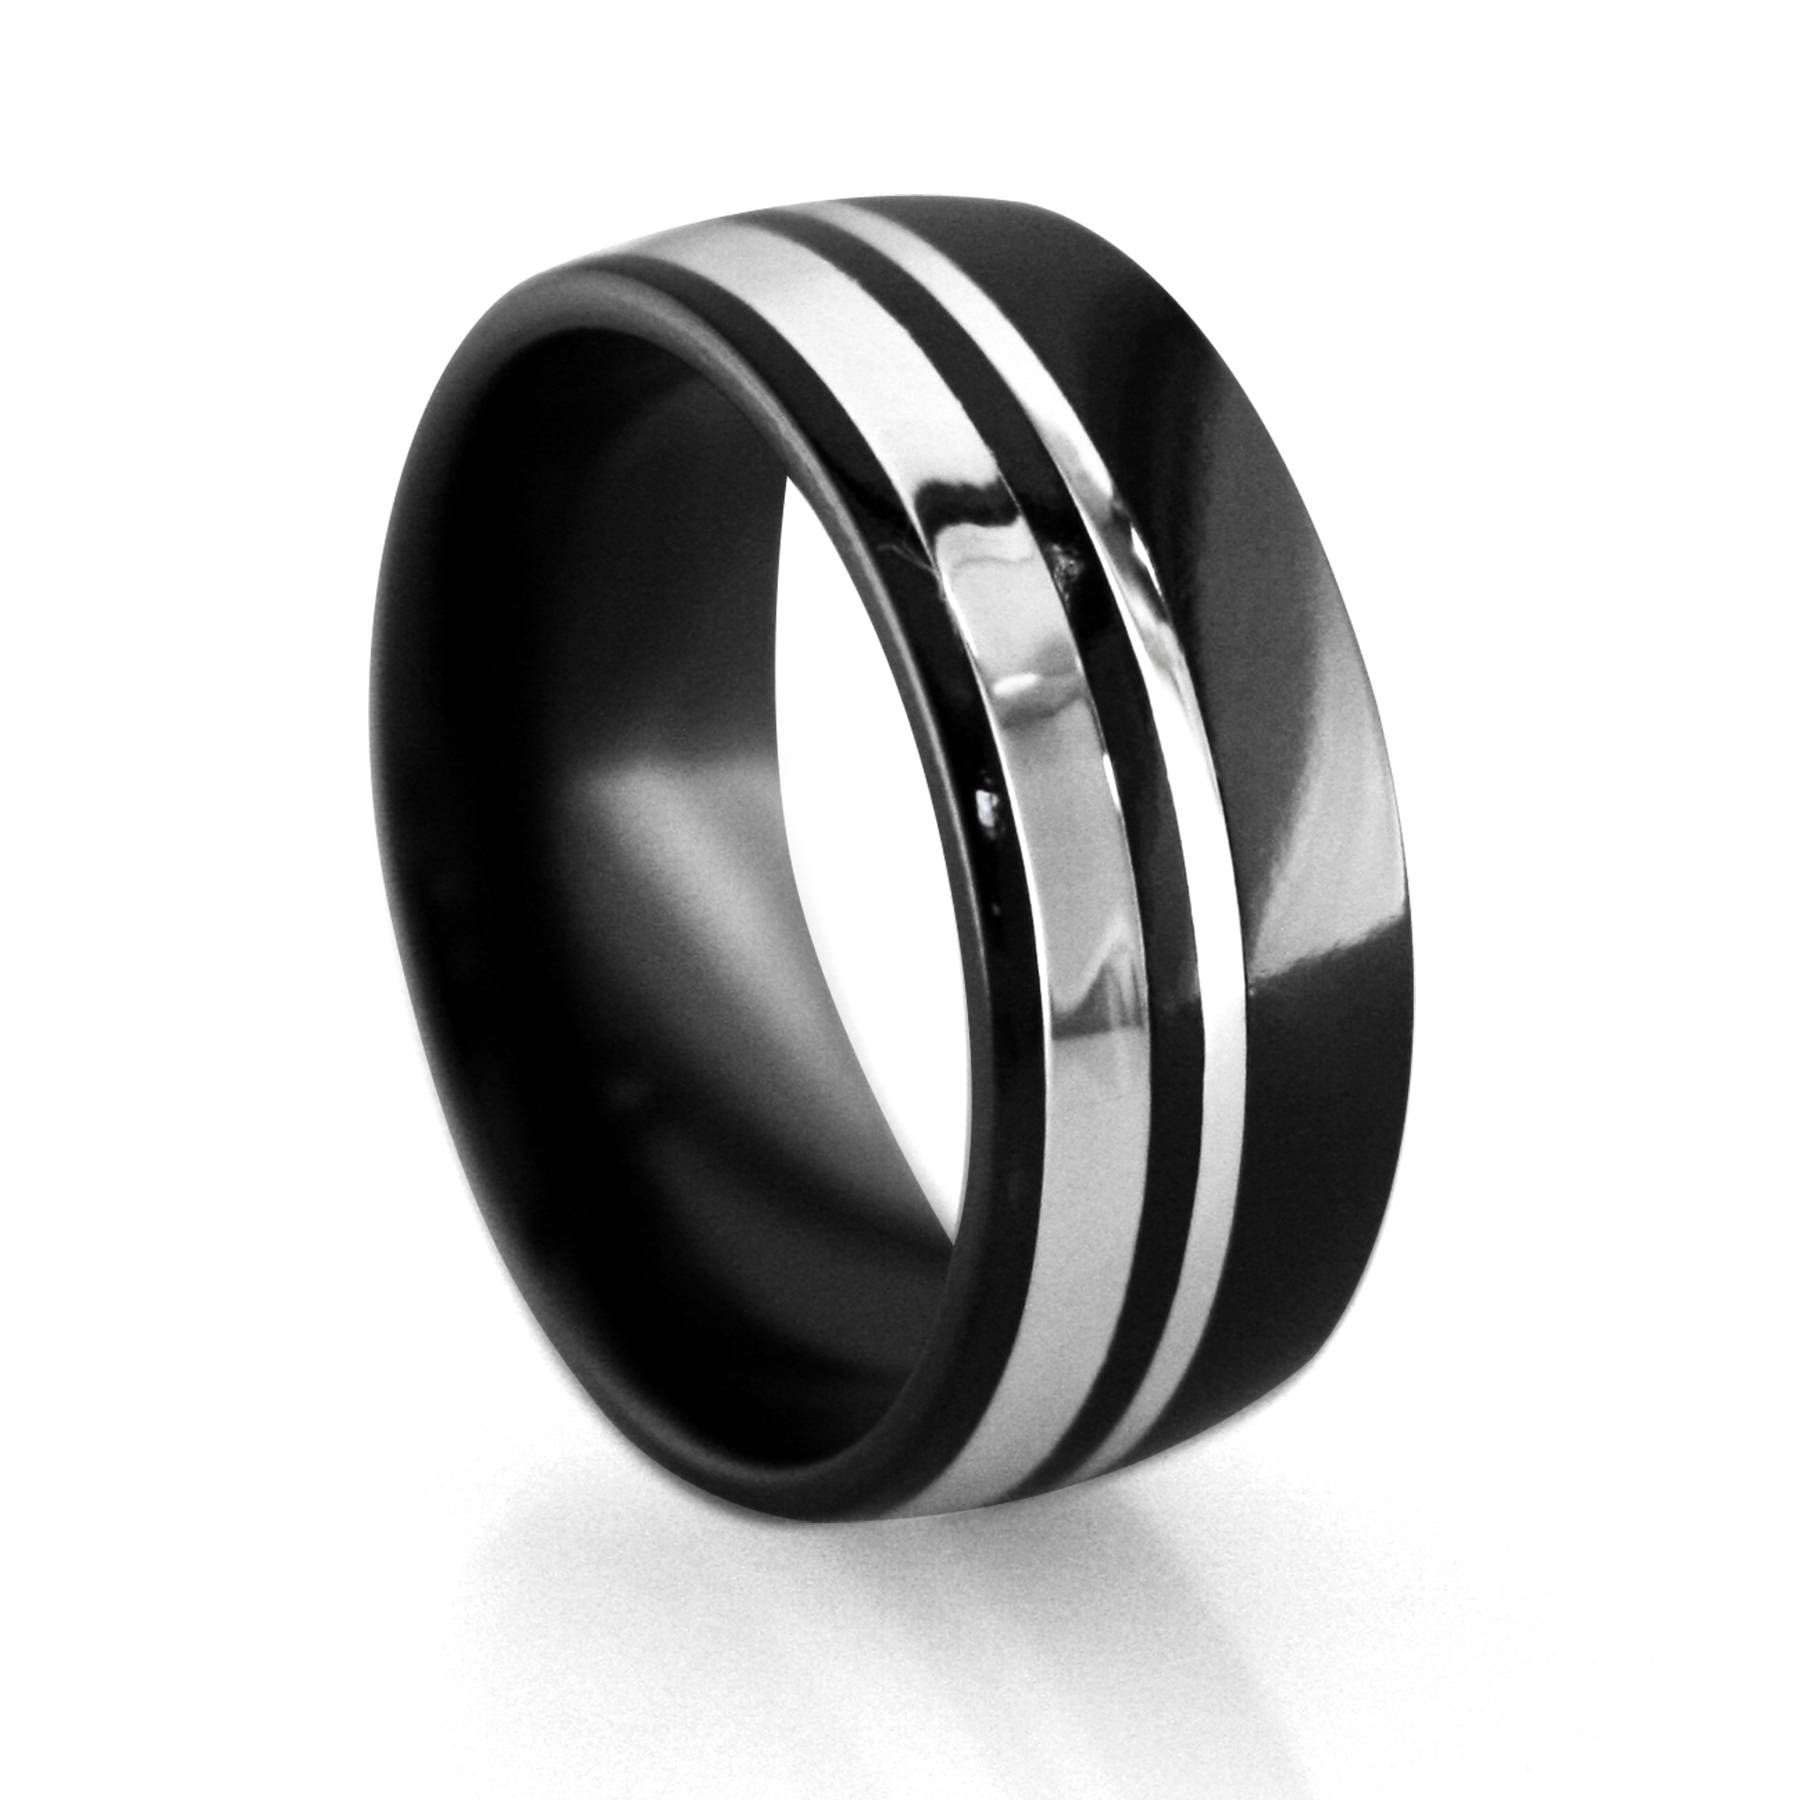 Black Gold Mens Wedding Rings Tags : Tungsten Mens Wedding Rings Throughout Black Gold Wedding Bands For Men (View 11 of 15)